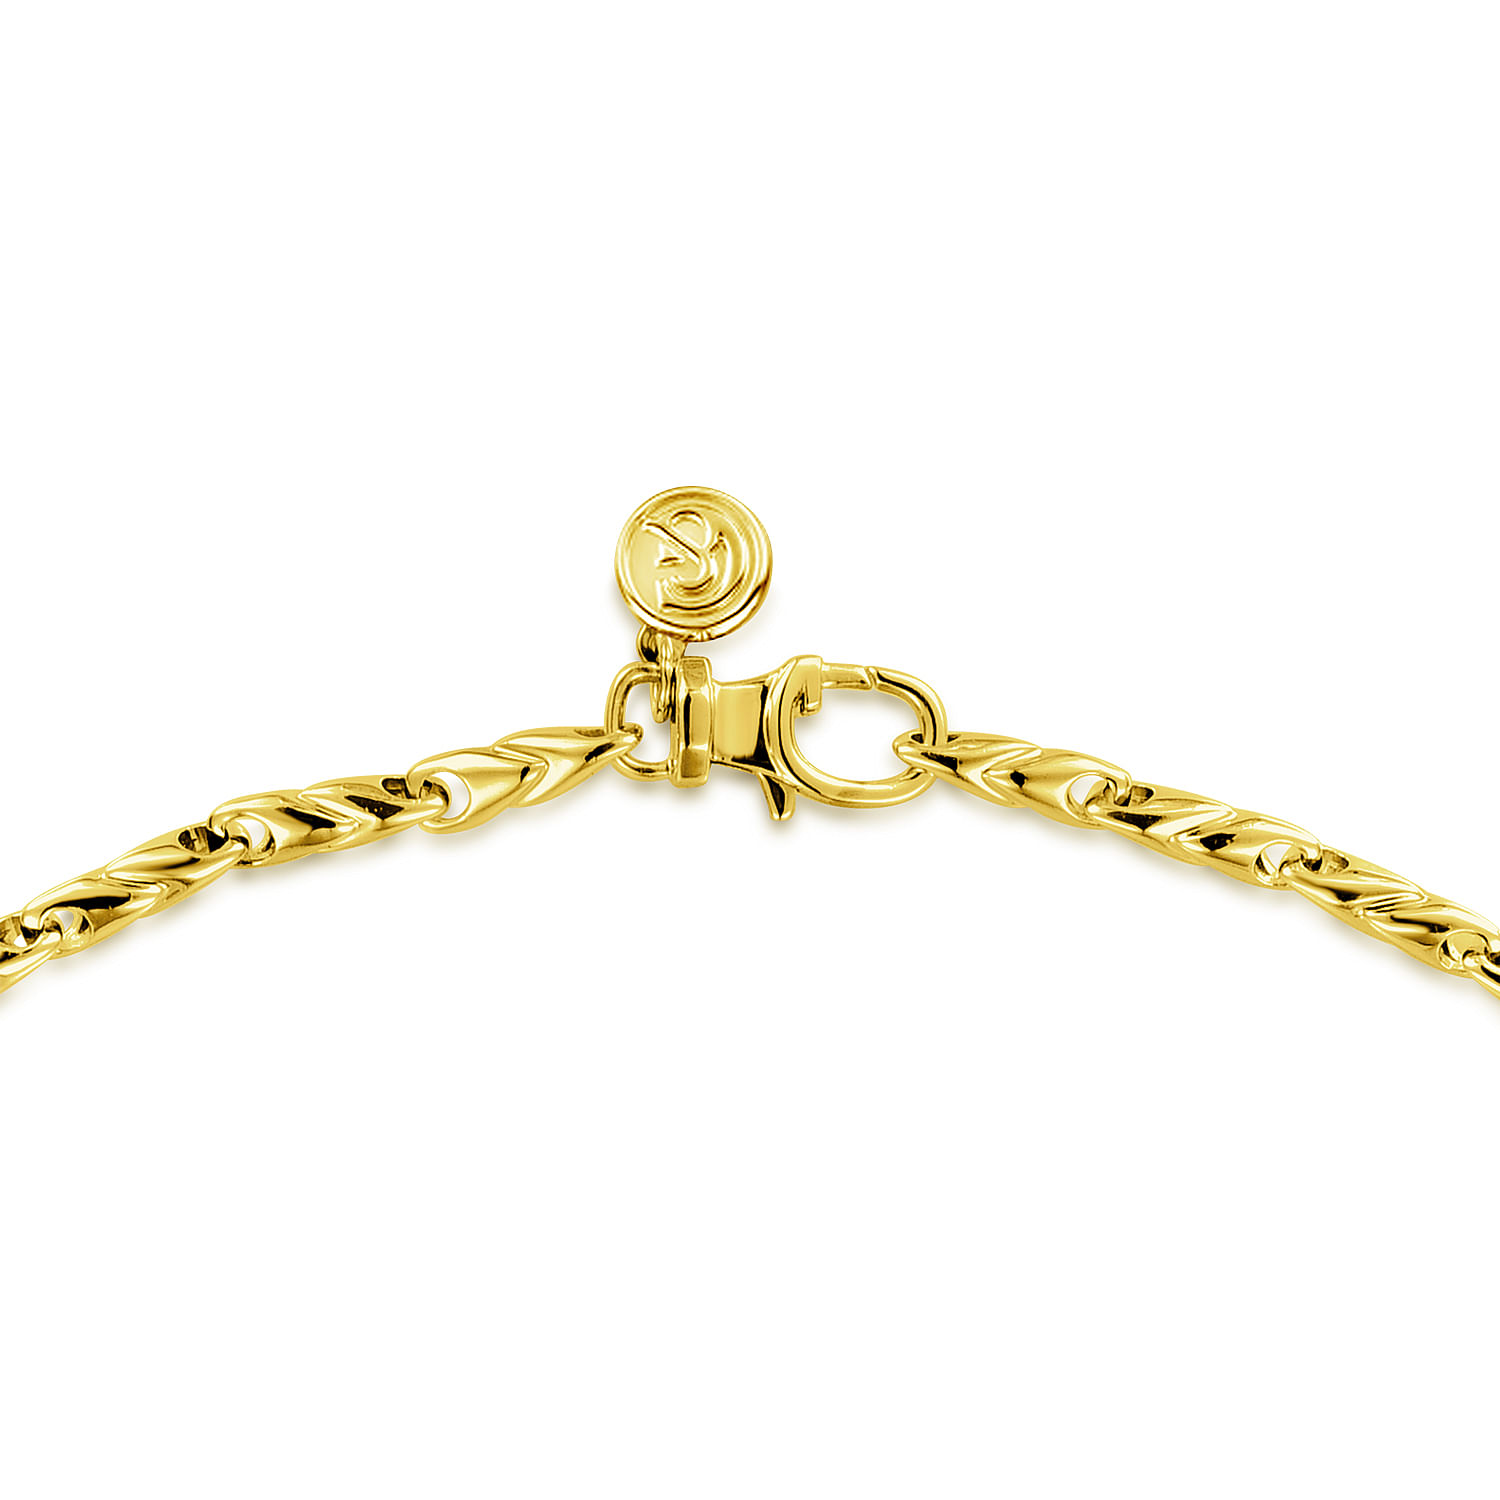 22 Inch 14K Yellow Gold Hollow Men's Chain Necklace